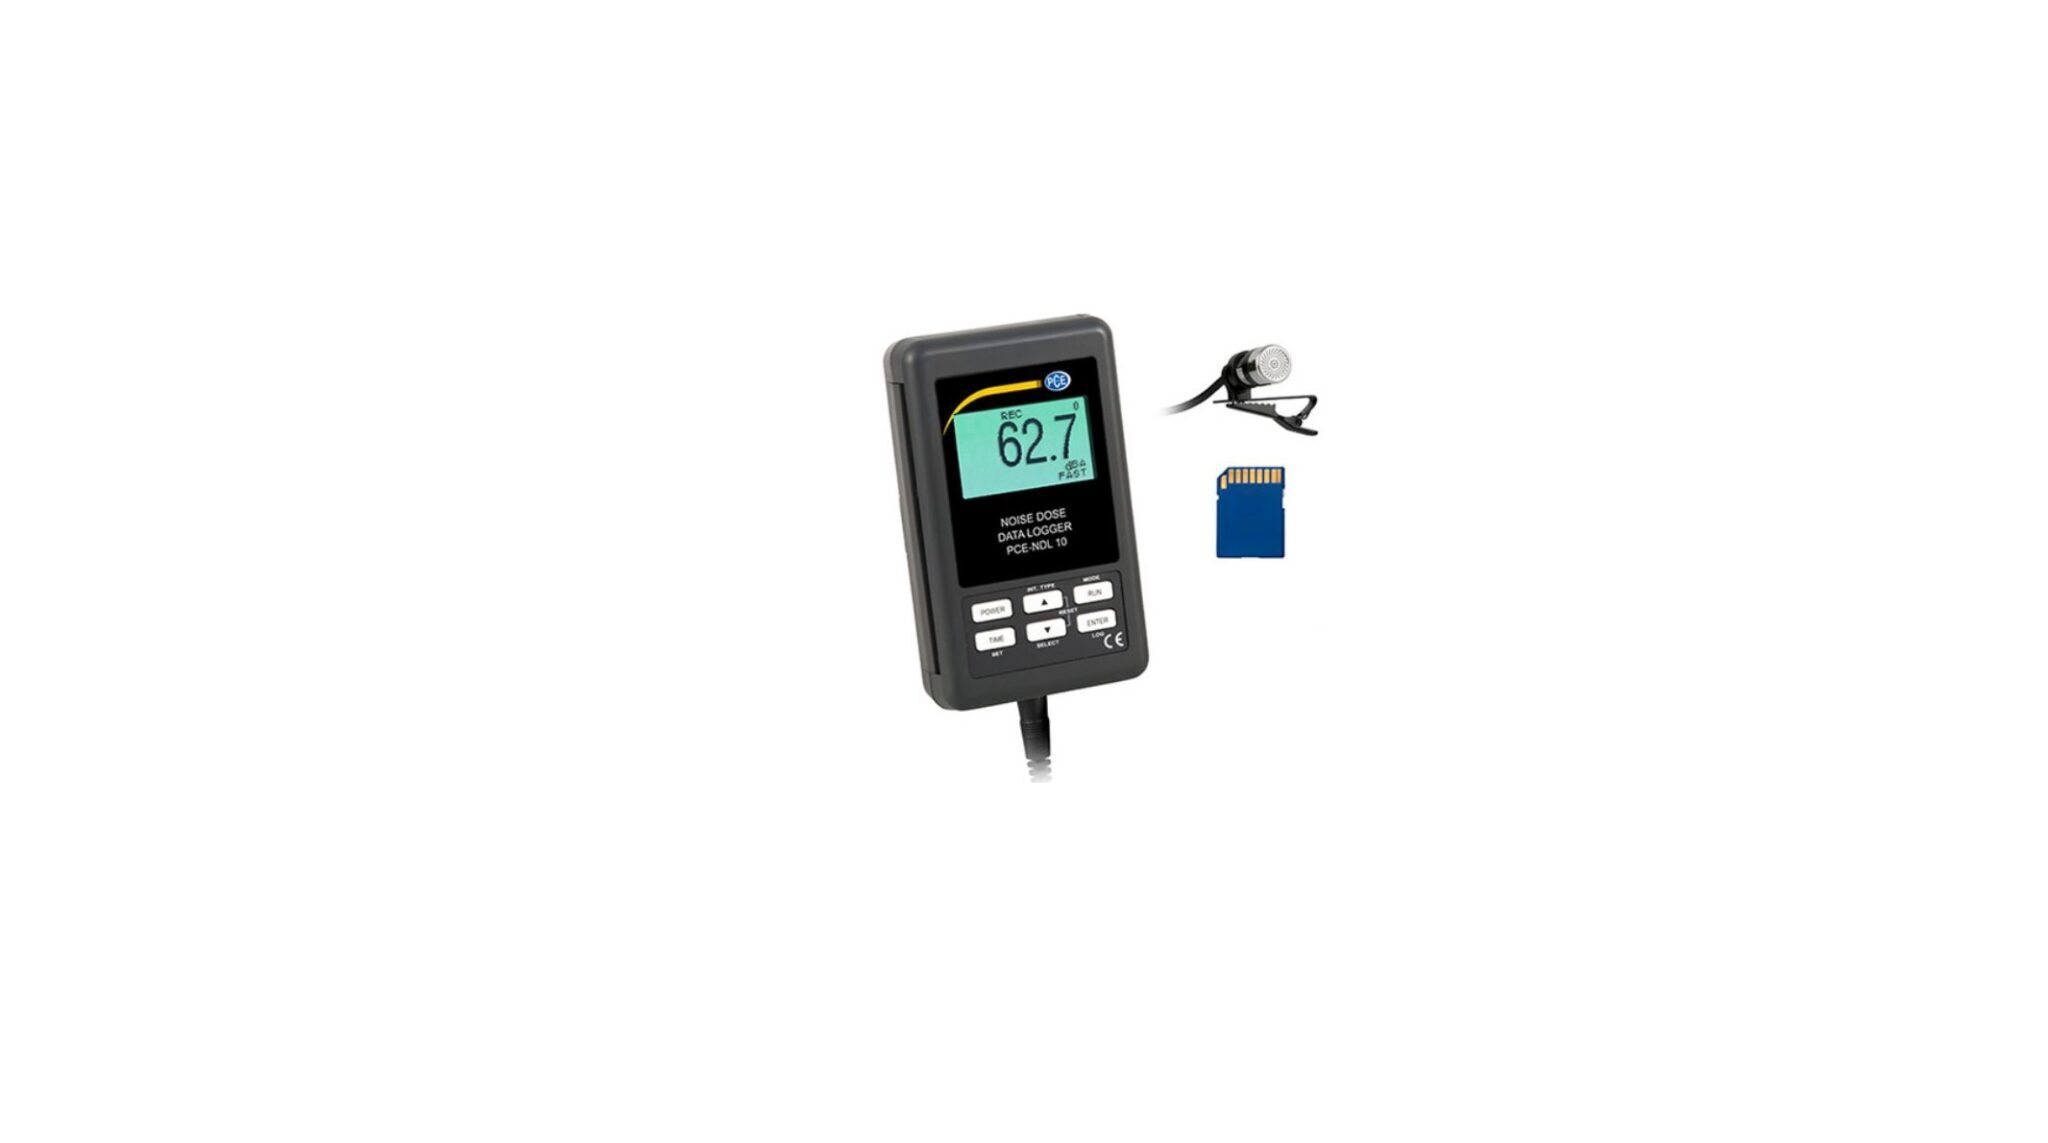 NDL 10 Noise Dose Meter